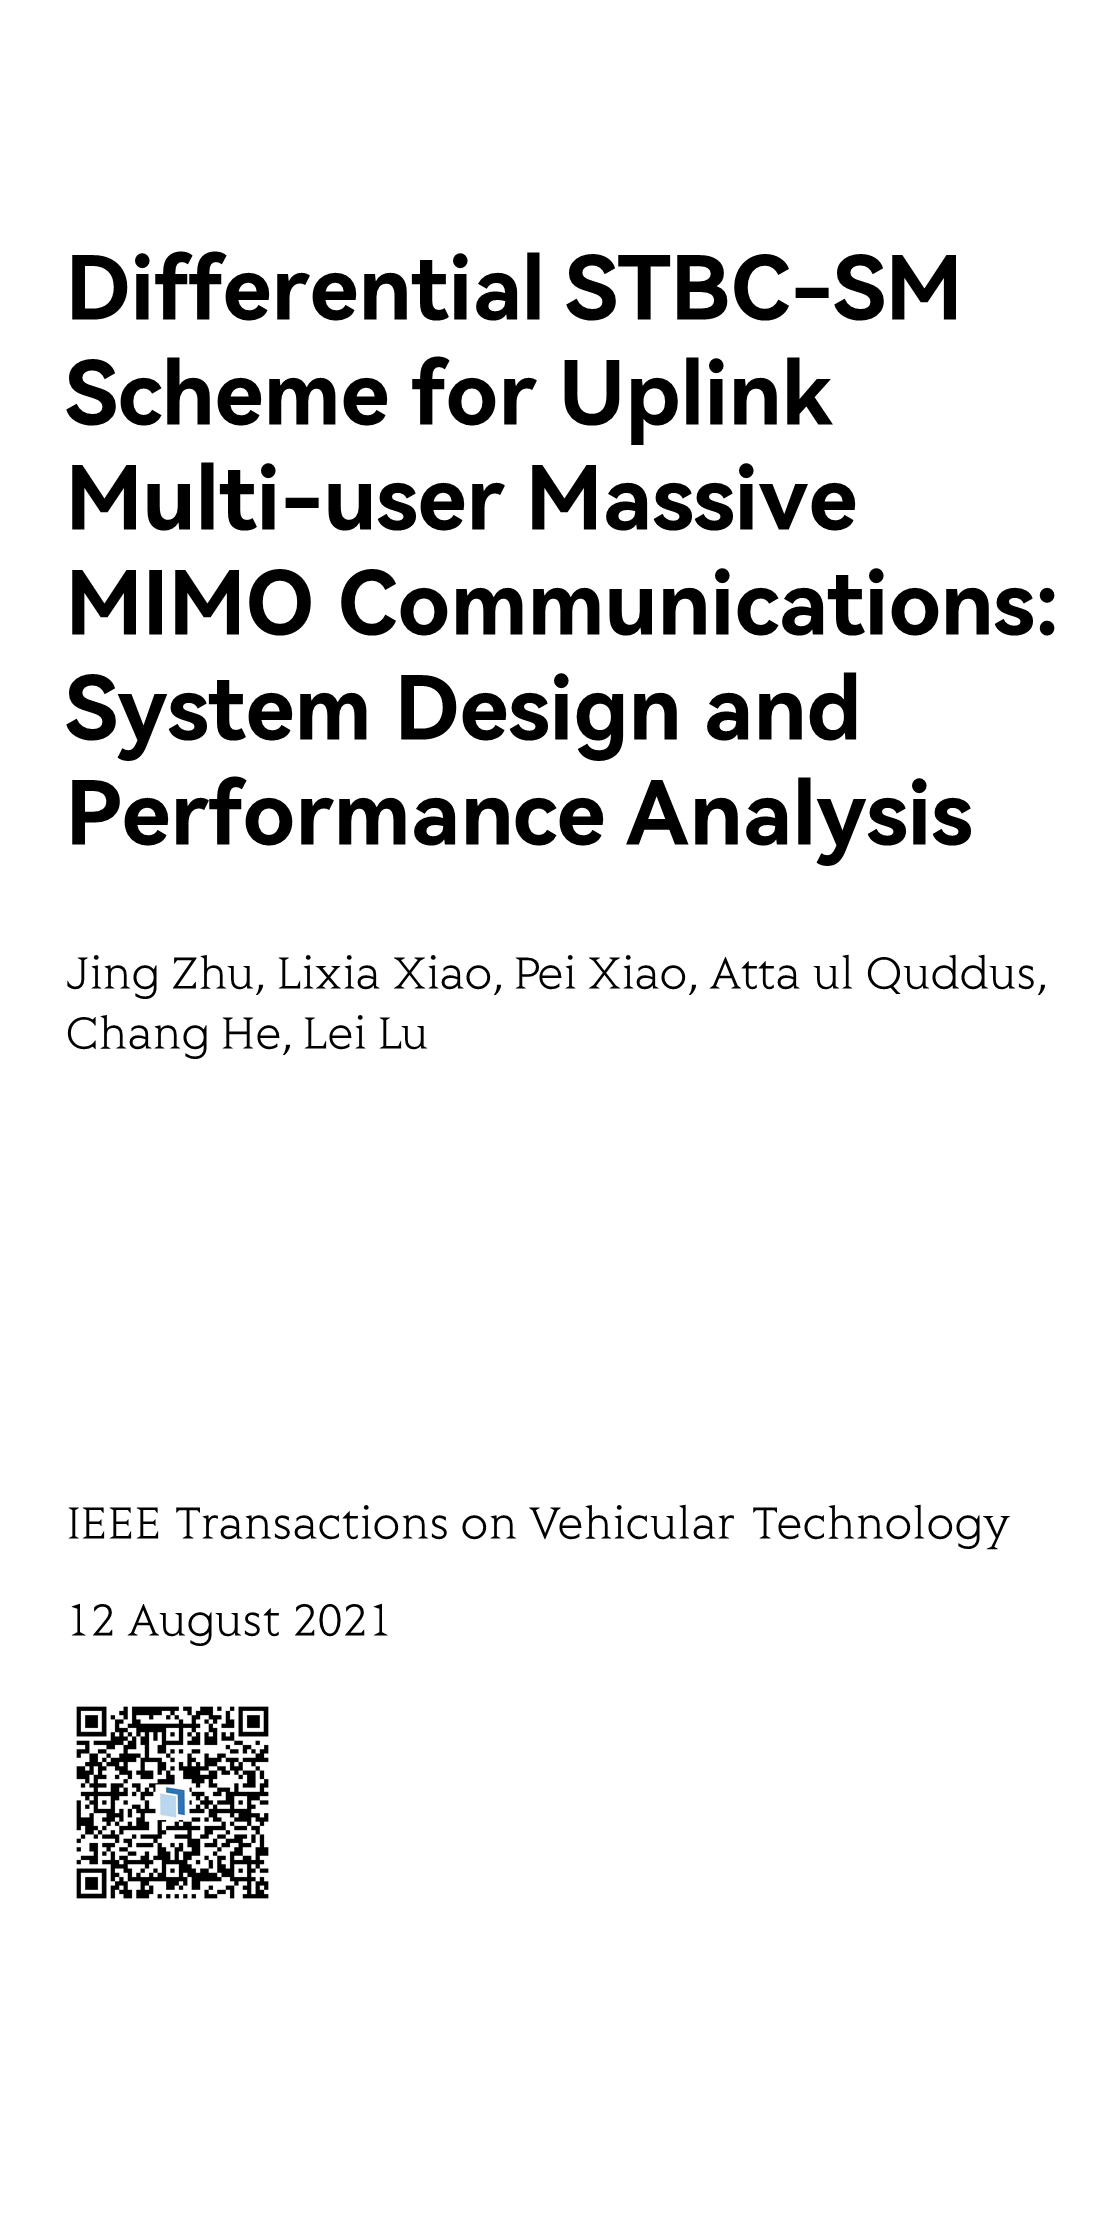 Differential STBC-SM Scheme for Uplink Multi-user Massive MIMO Communications: System Design and Performance Analysis_1